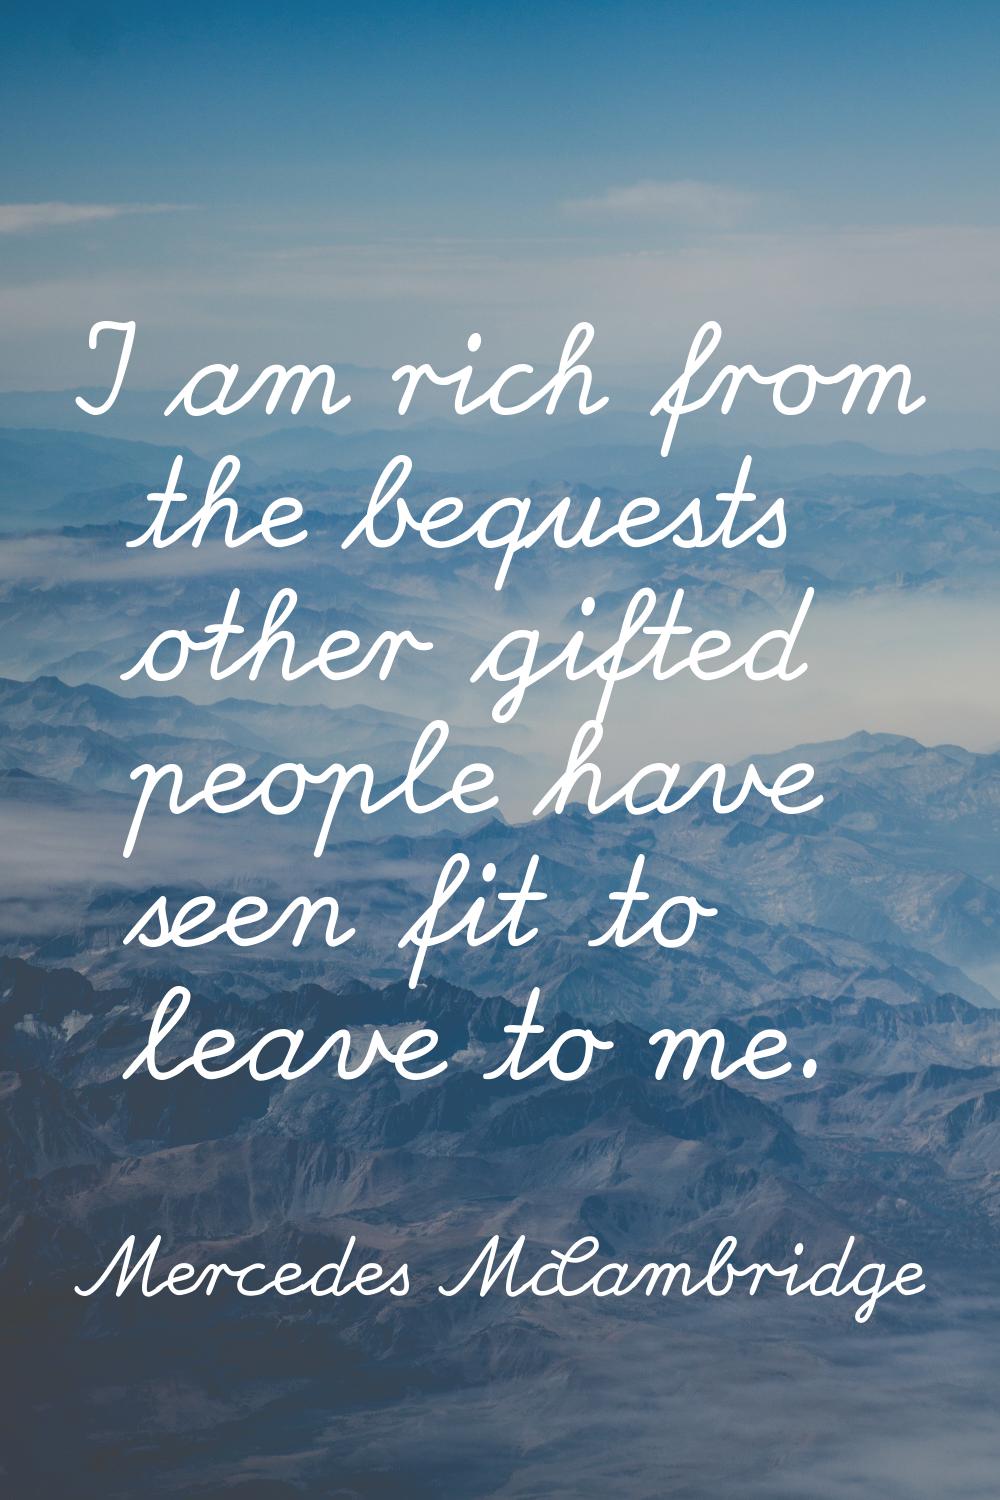 I am rich from the bequests other gifted people have seen fit to leave to me.